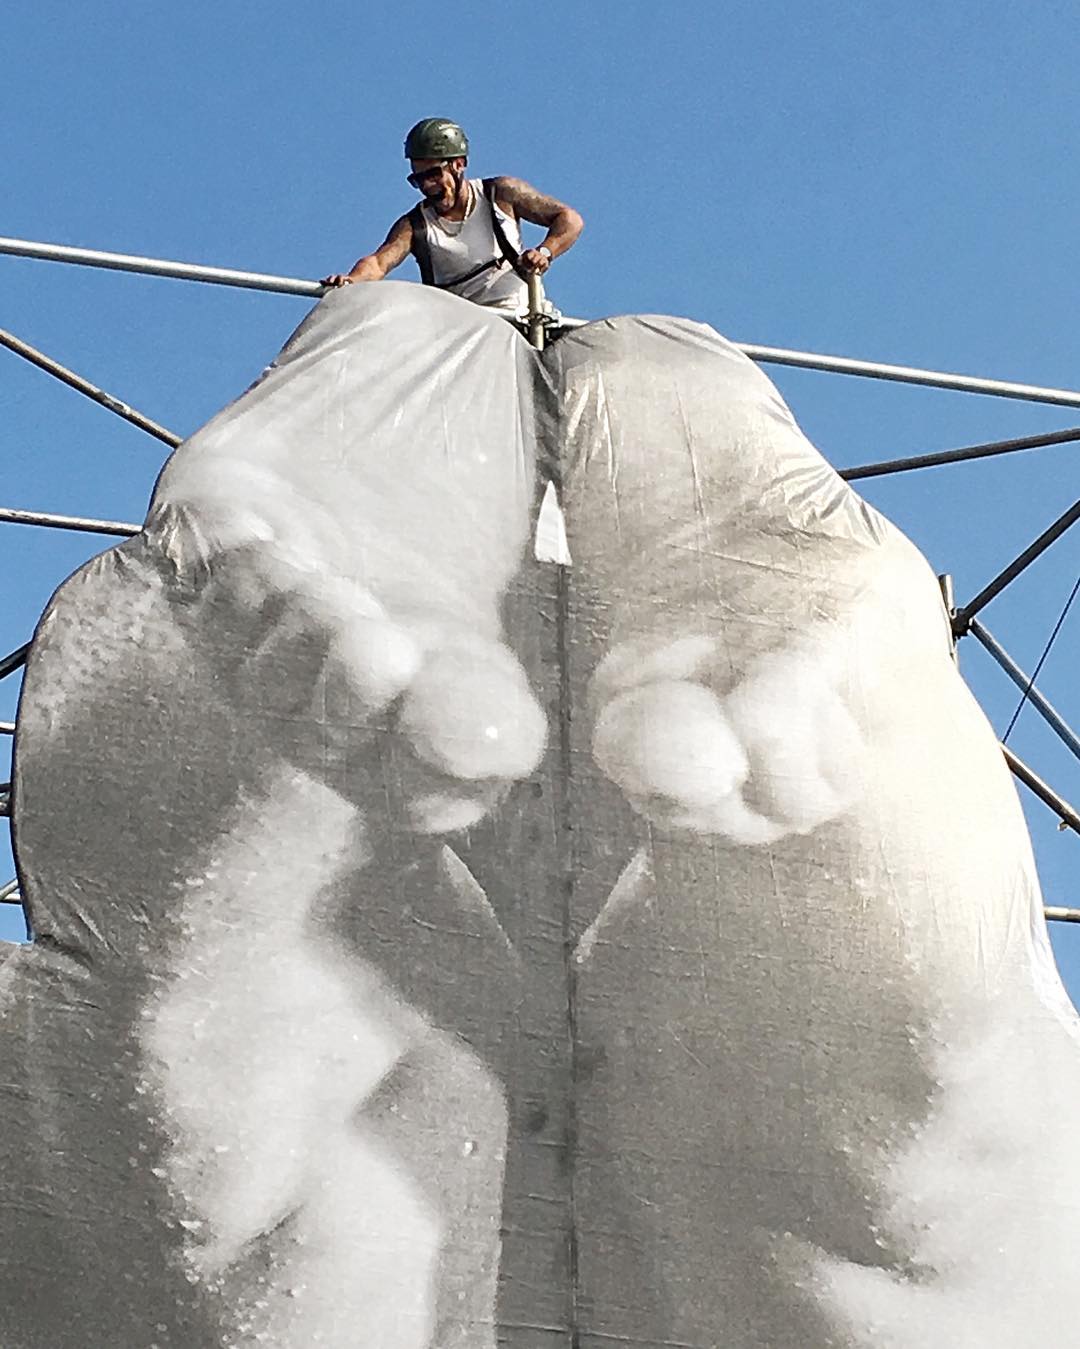 JR's team install a new piece in Rio. Image courtesy of the artist's Instagram